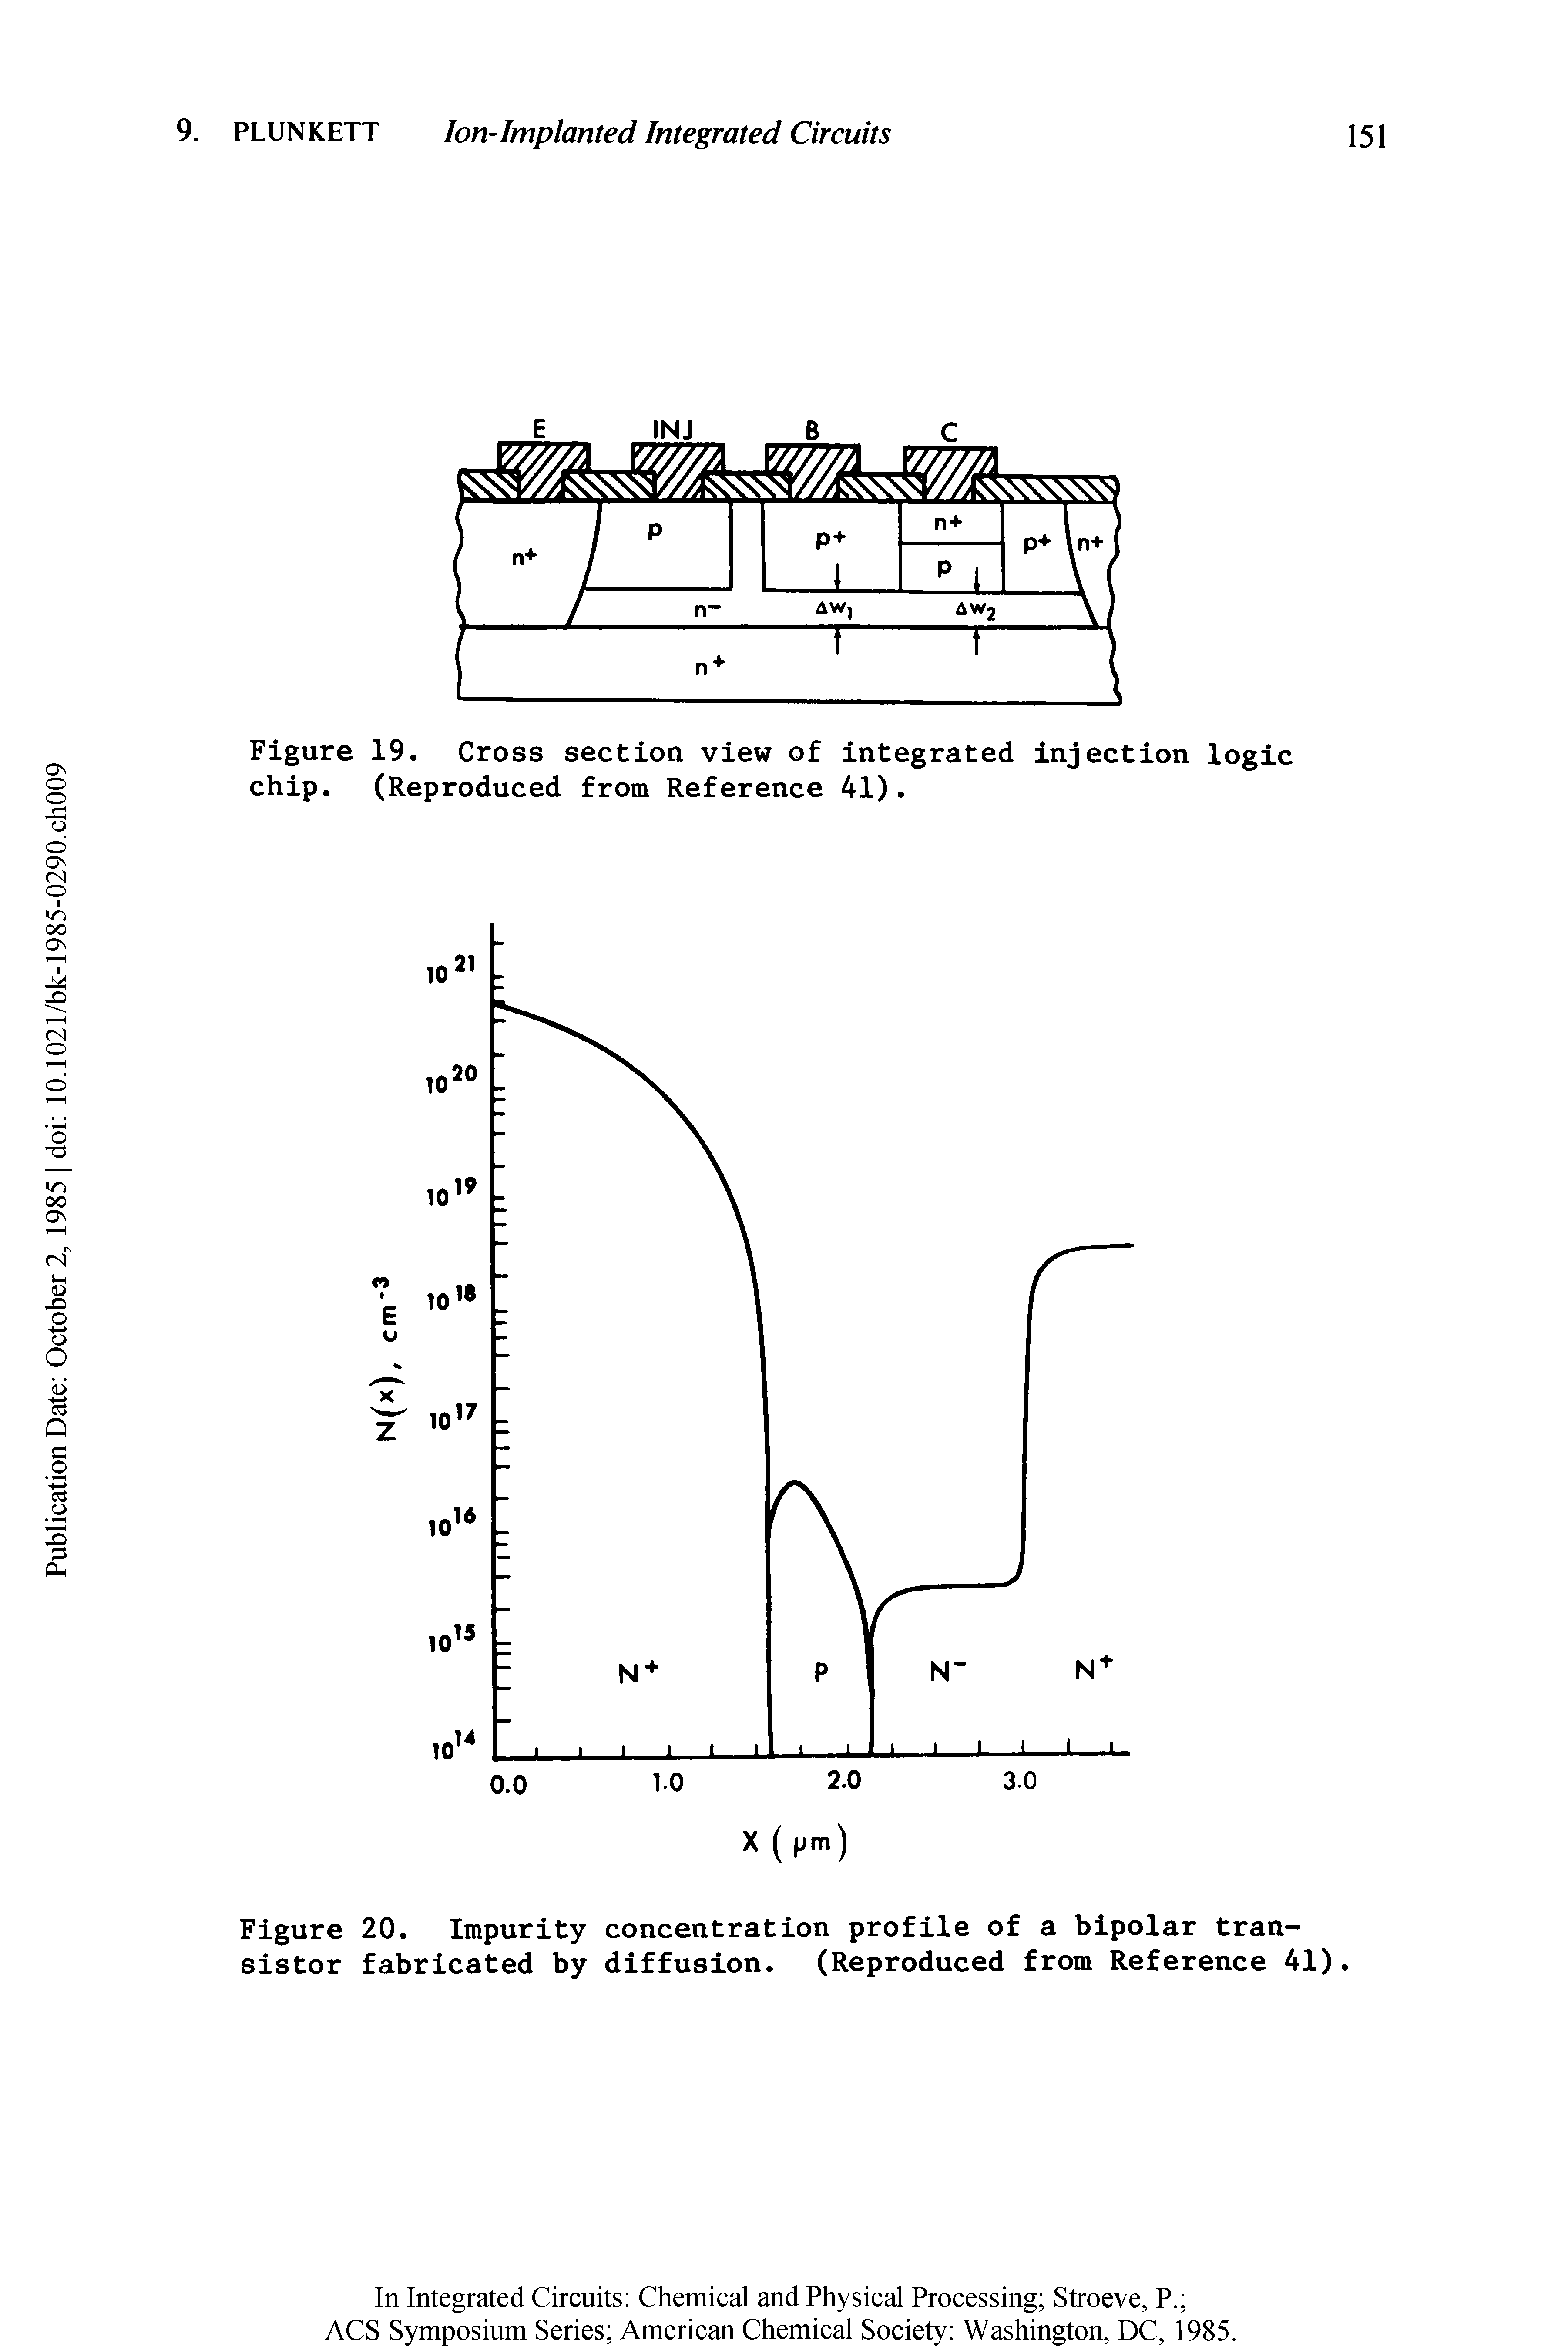 Figure 20. Impurity concentration profile of a bipolar transistor fabricated by diffusion. (Reproduced from Reference 41).